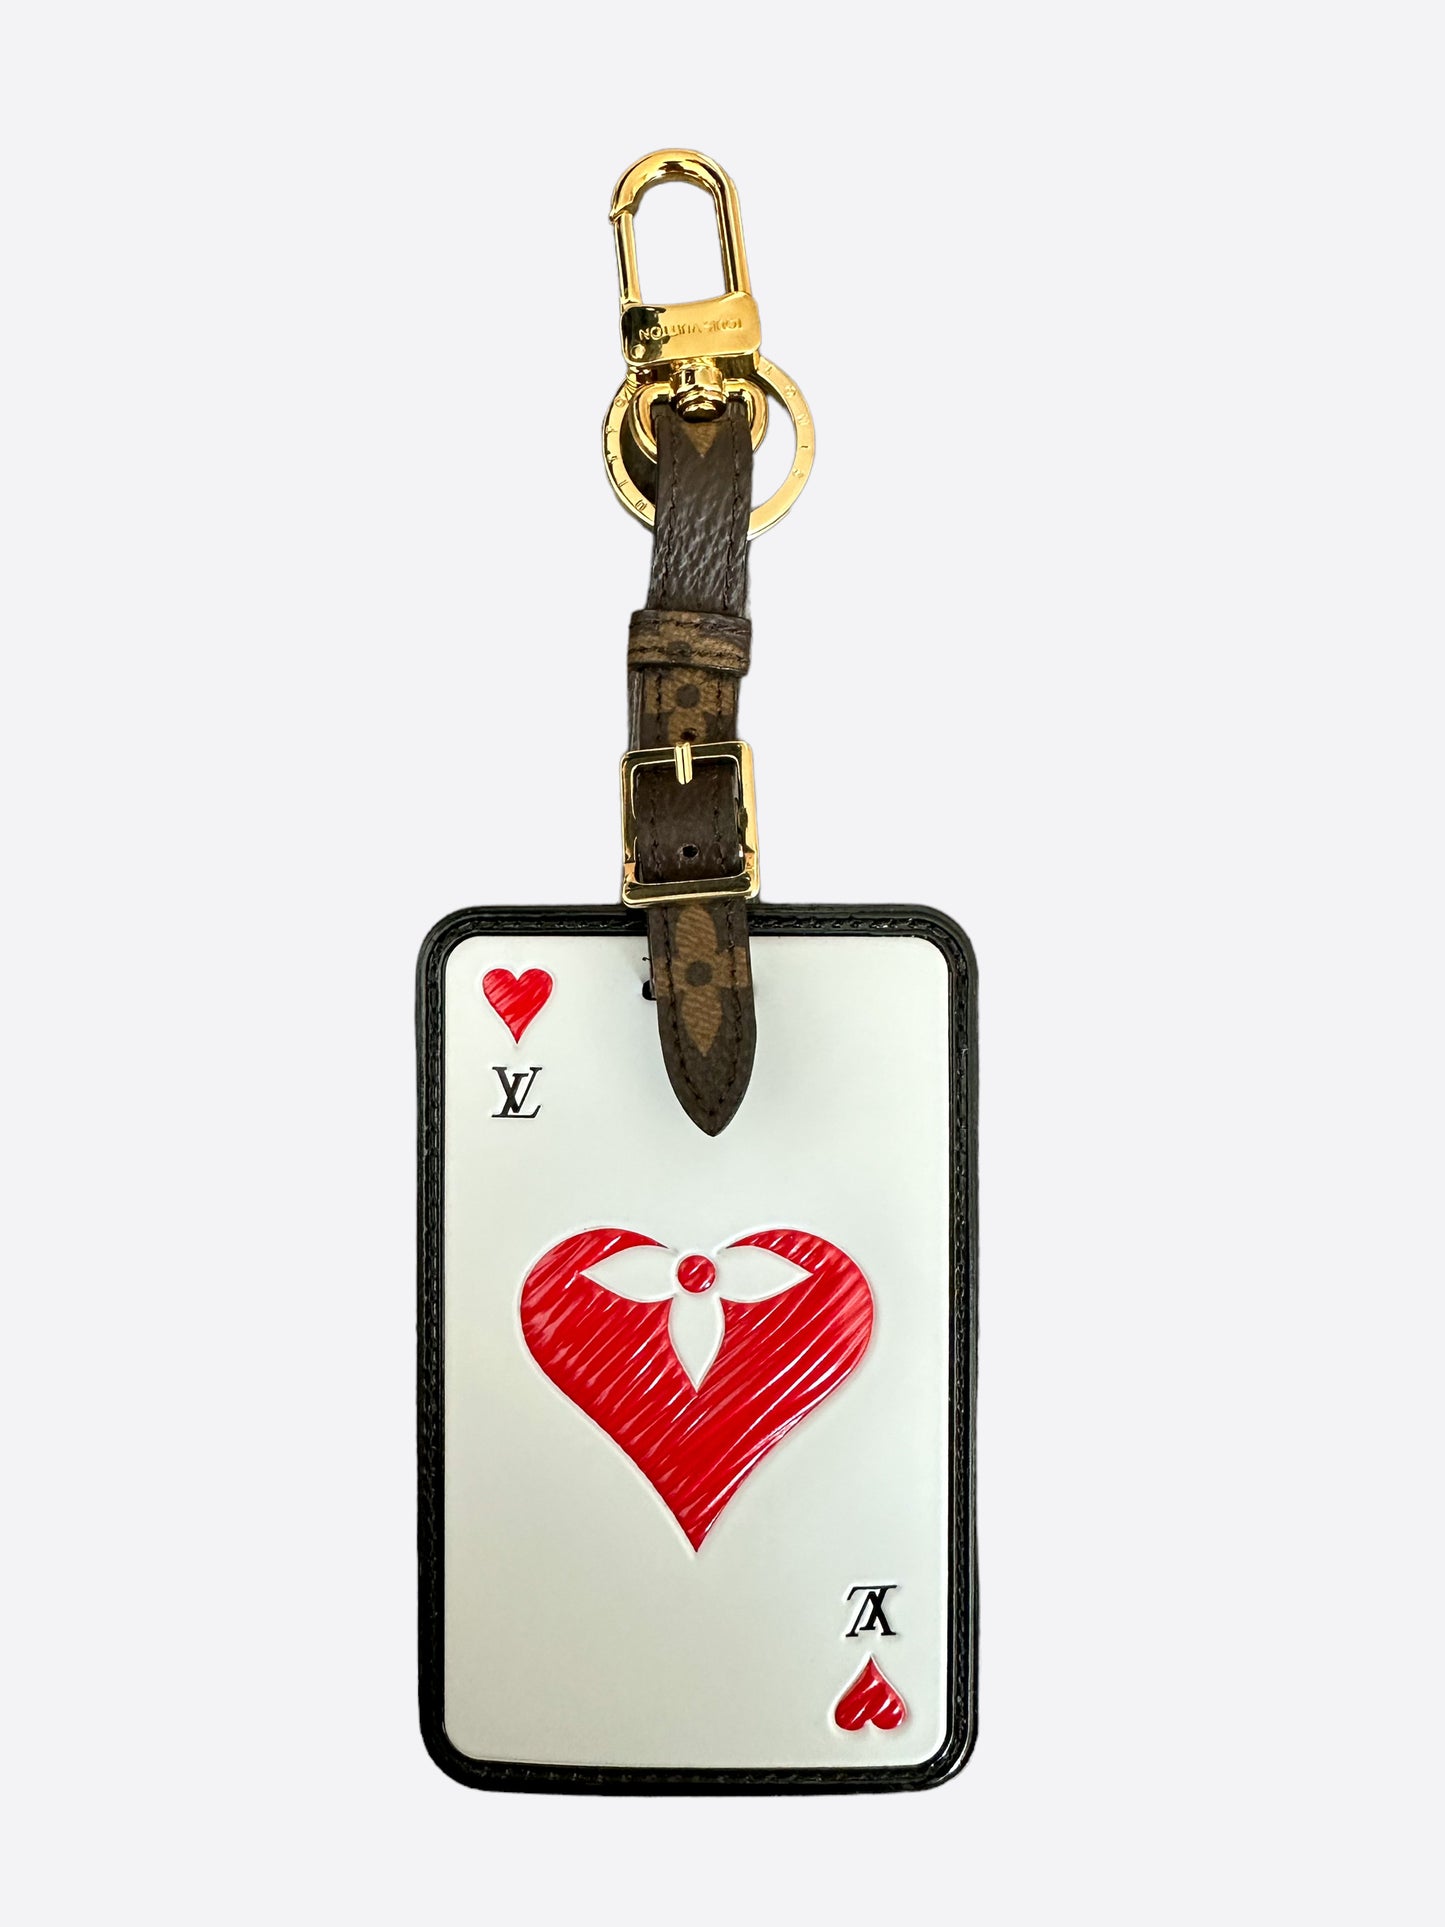 In LVoe with Louis Vuitton: The Louis Vuitton Luggage Tag